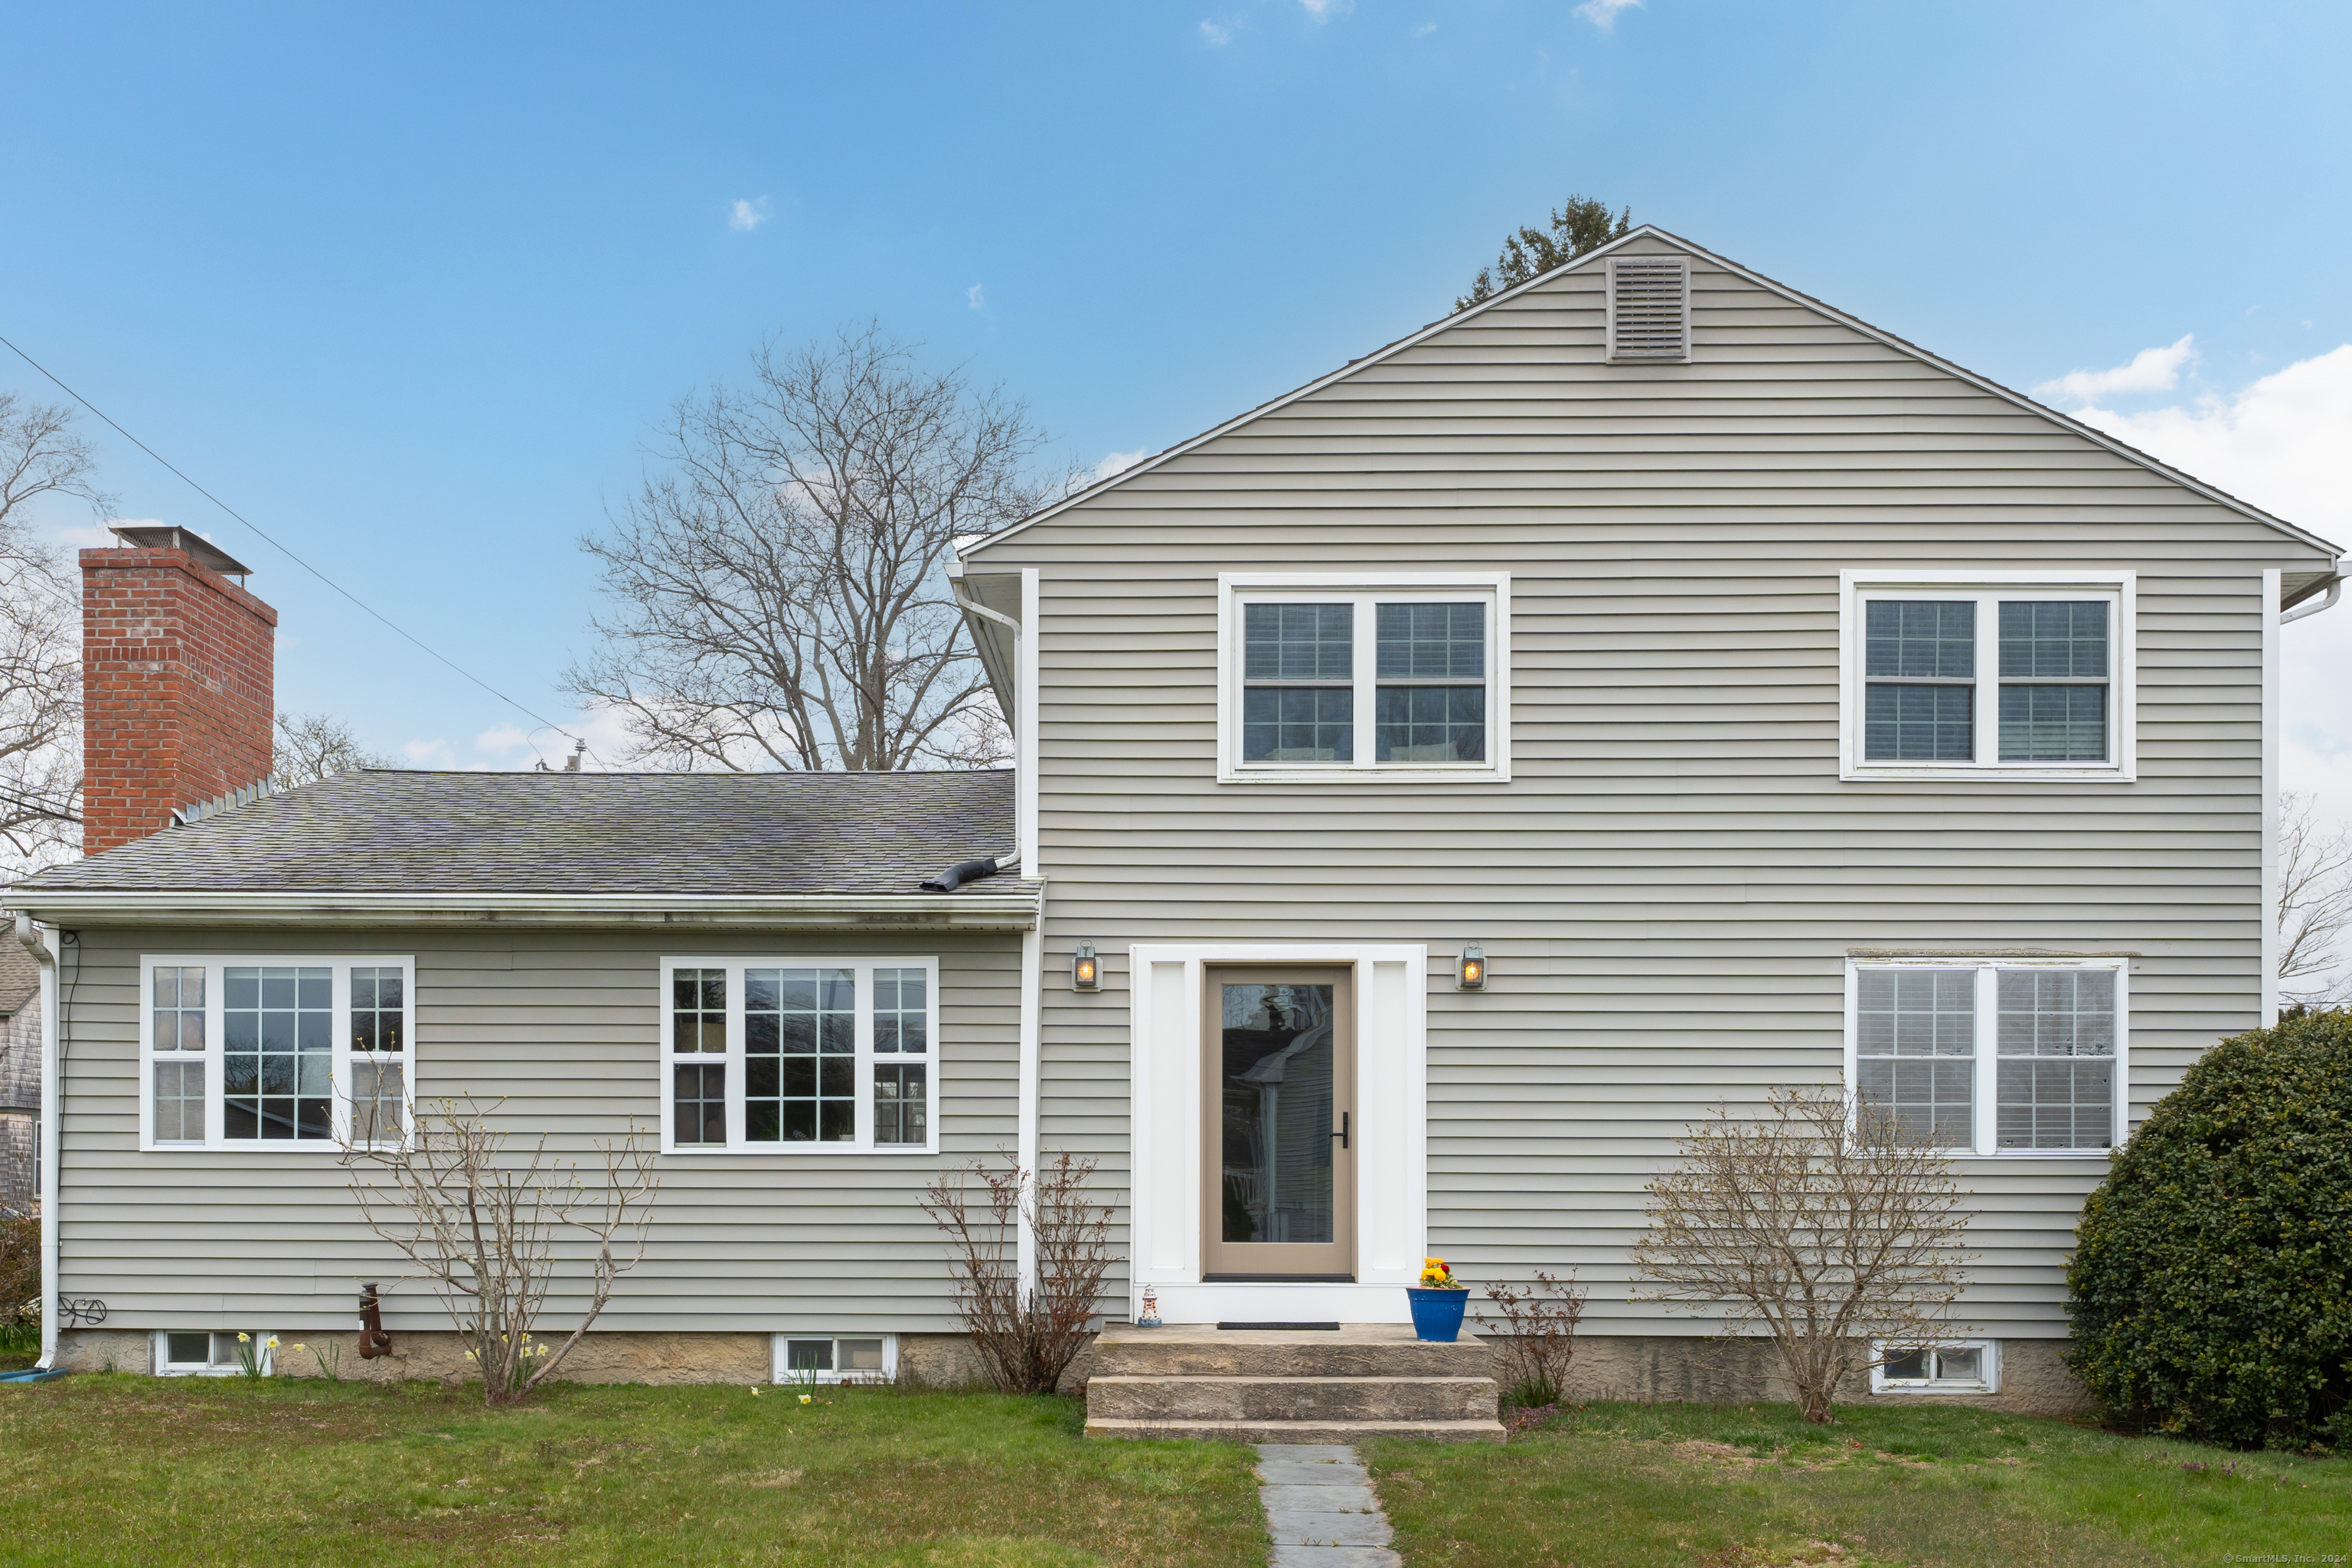 Welcome to 8 East St., Old Saybrook! Just 2 blocks from downtown Old Saybrook!